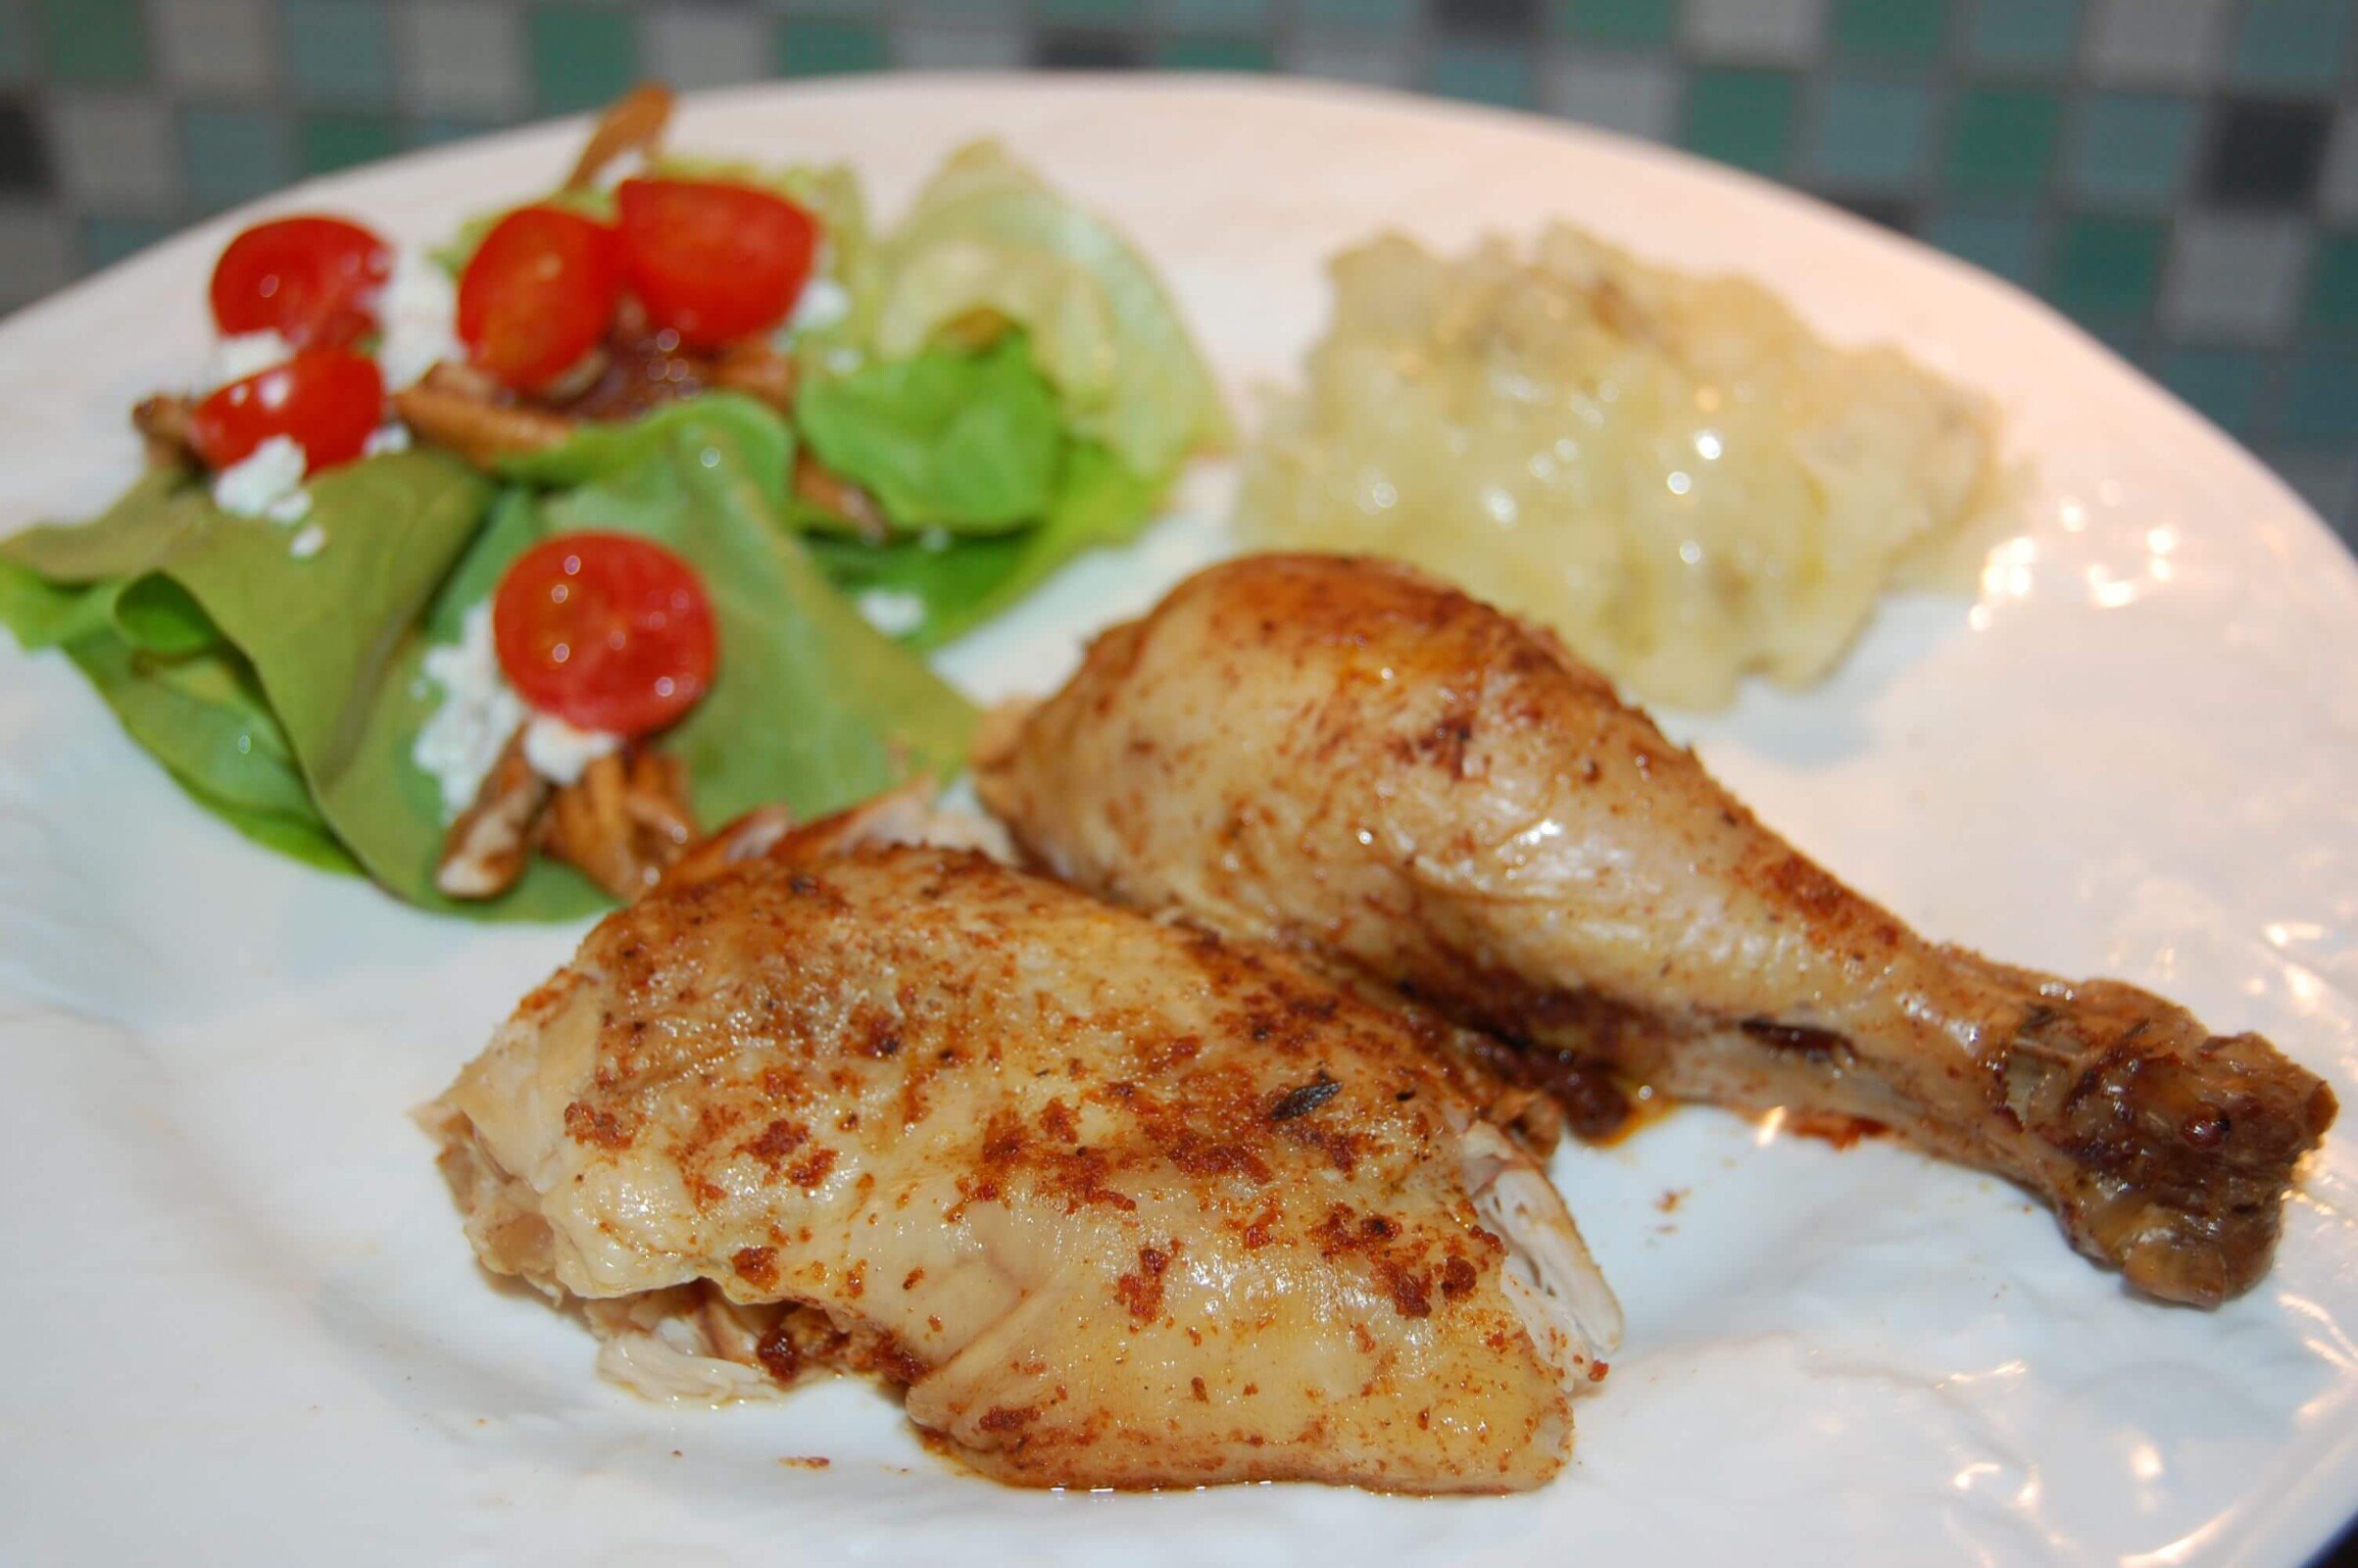 Homemade chicken that's been cooked in a slow cooker